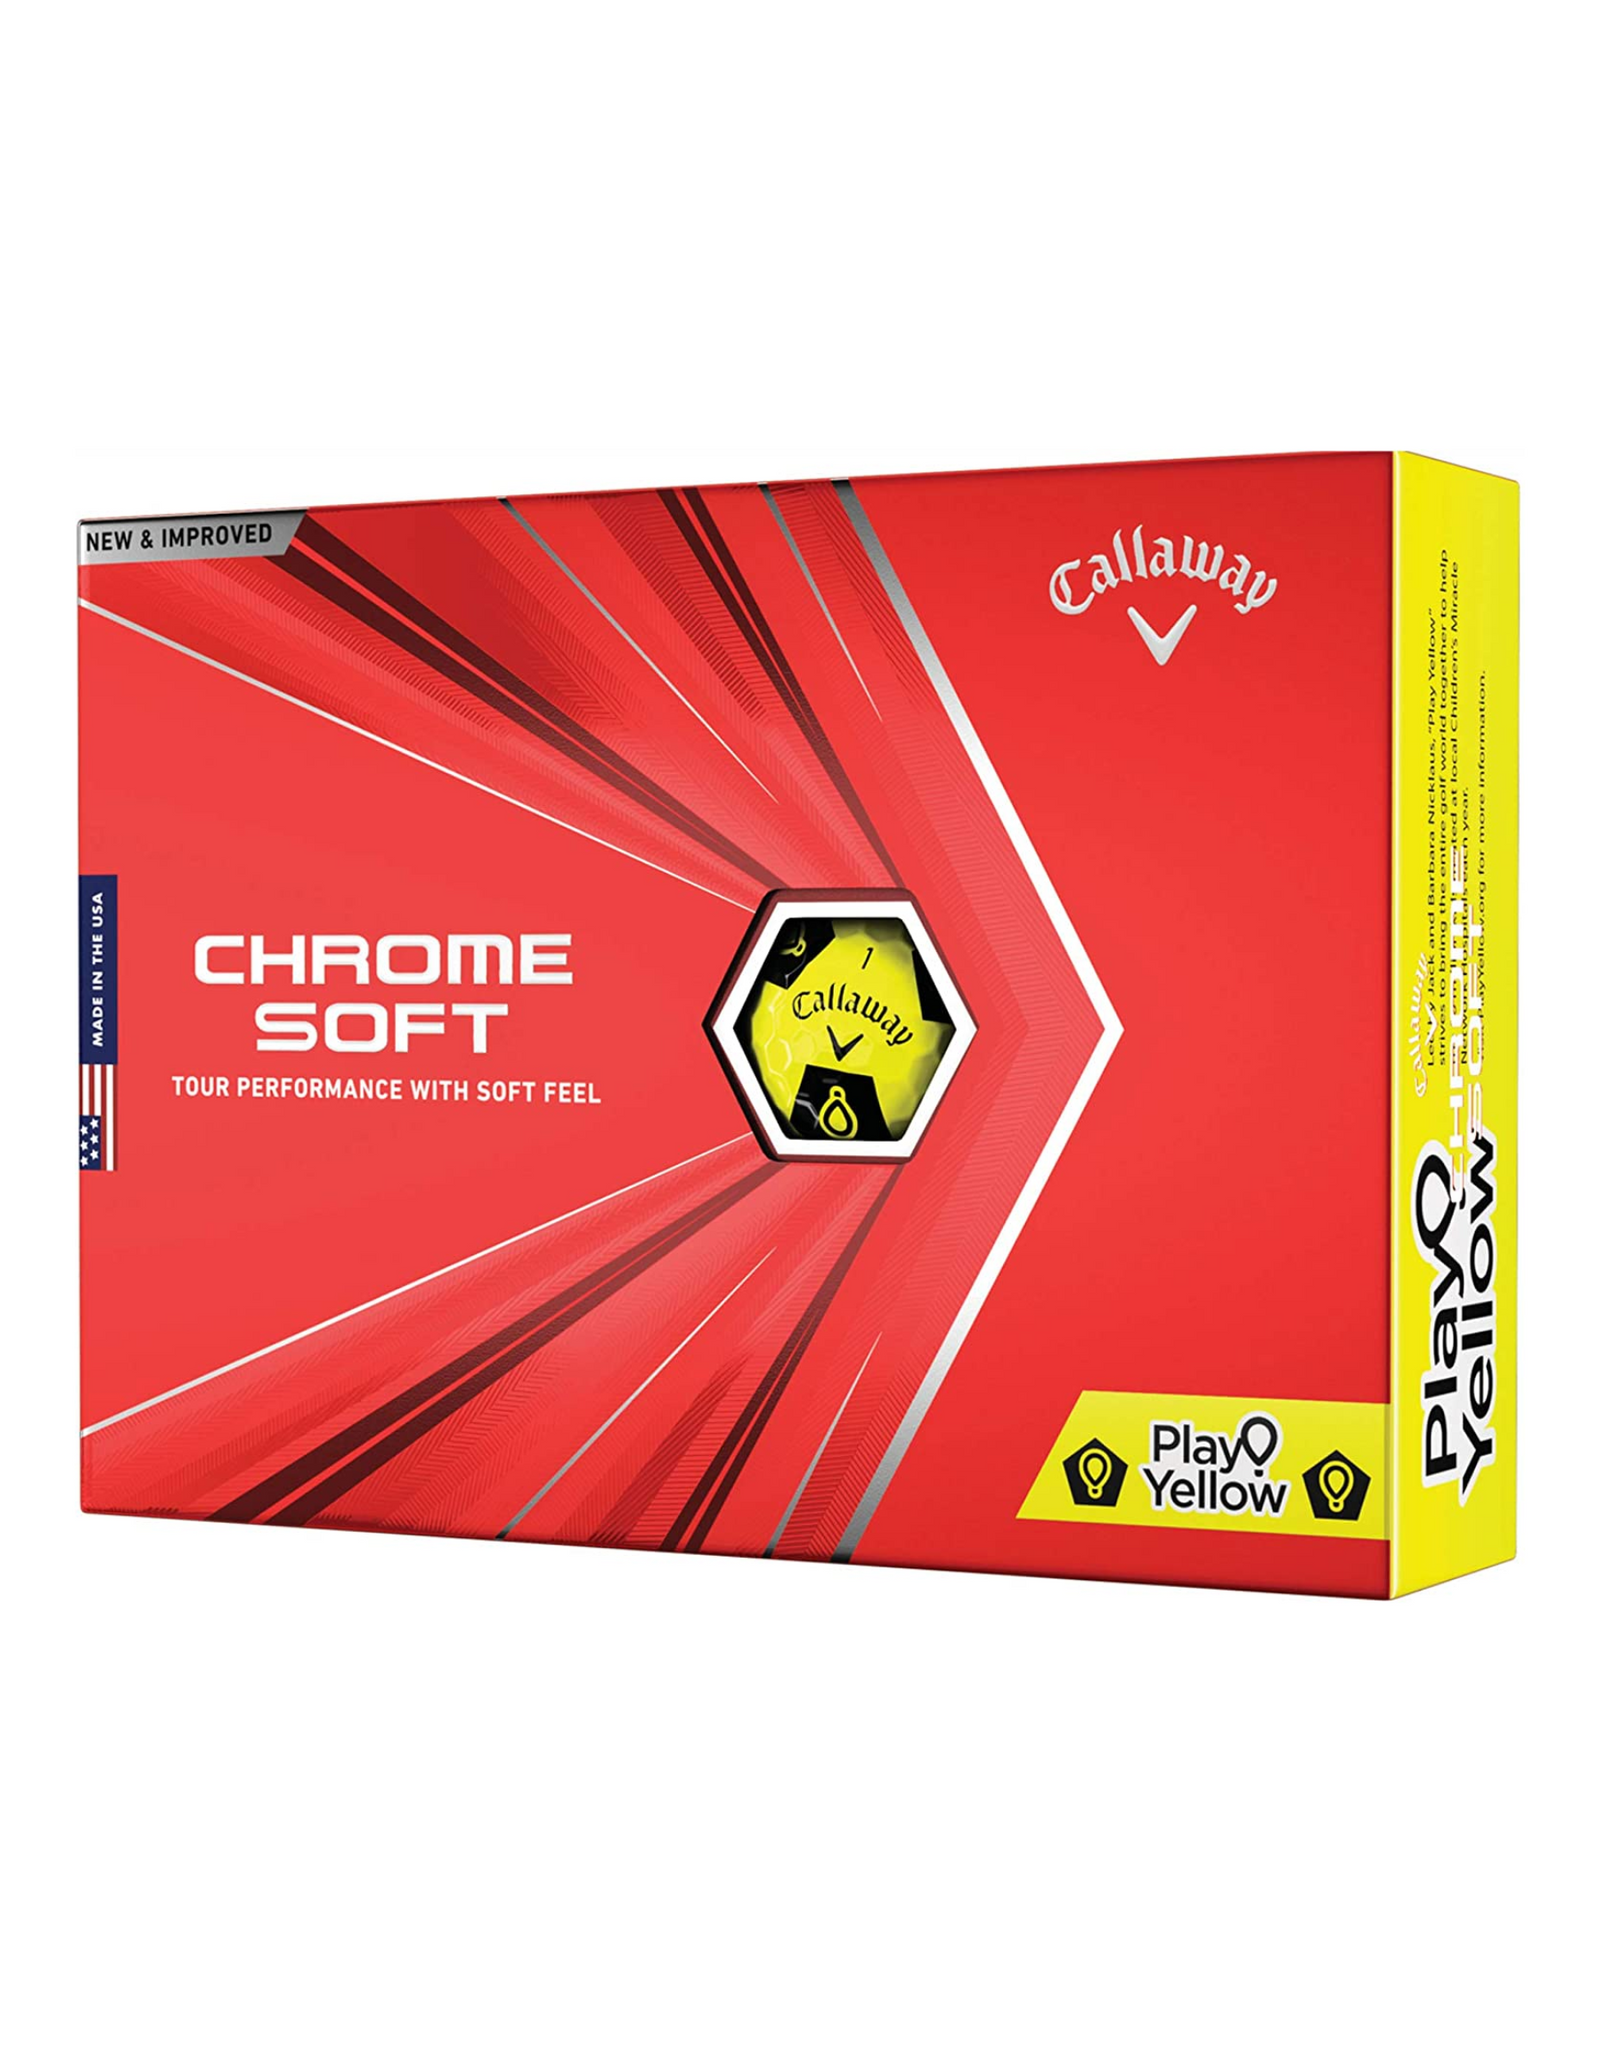 2020 Callaway Chrome Soft Golf Balls , Play Yellow Truvis (Limited Edition)